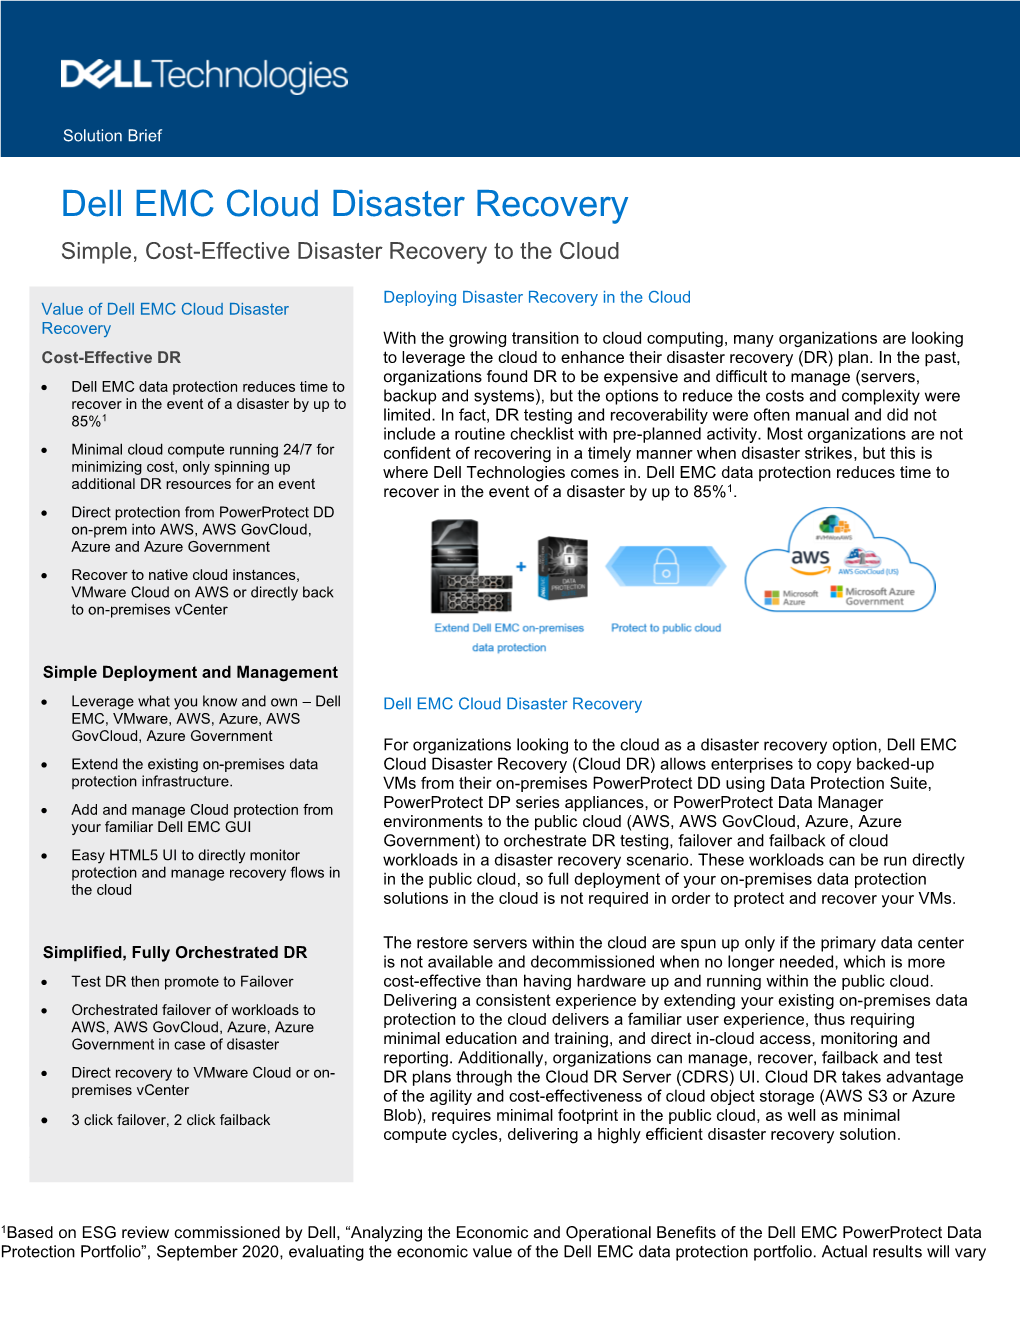 Cloud Disaster Recovery Simple, Cost-Effective Disaster Recovery to the Cloud